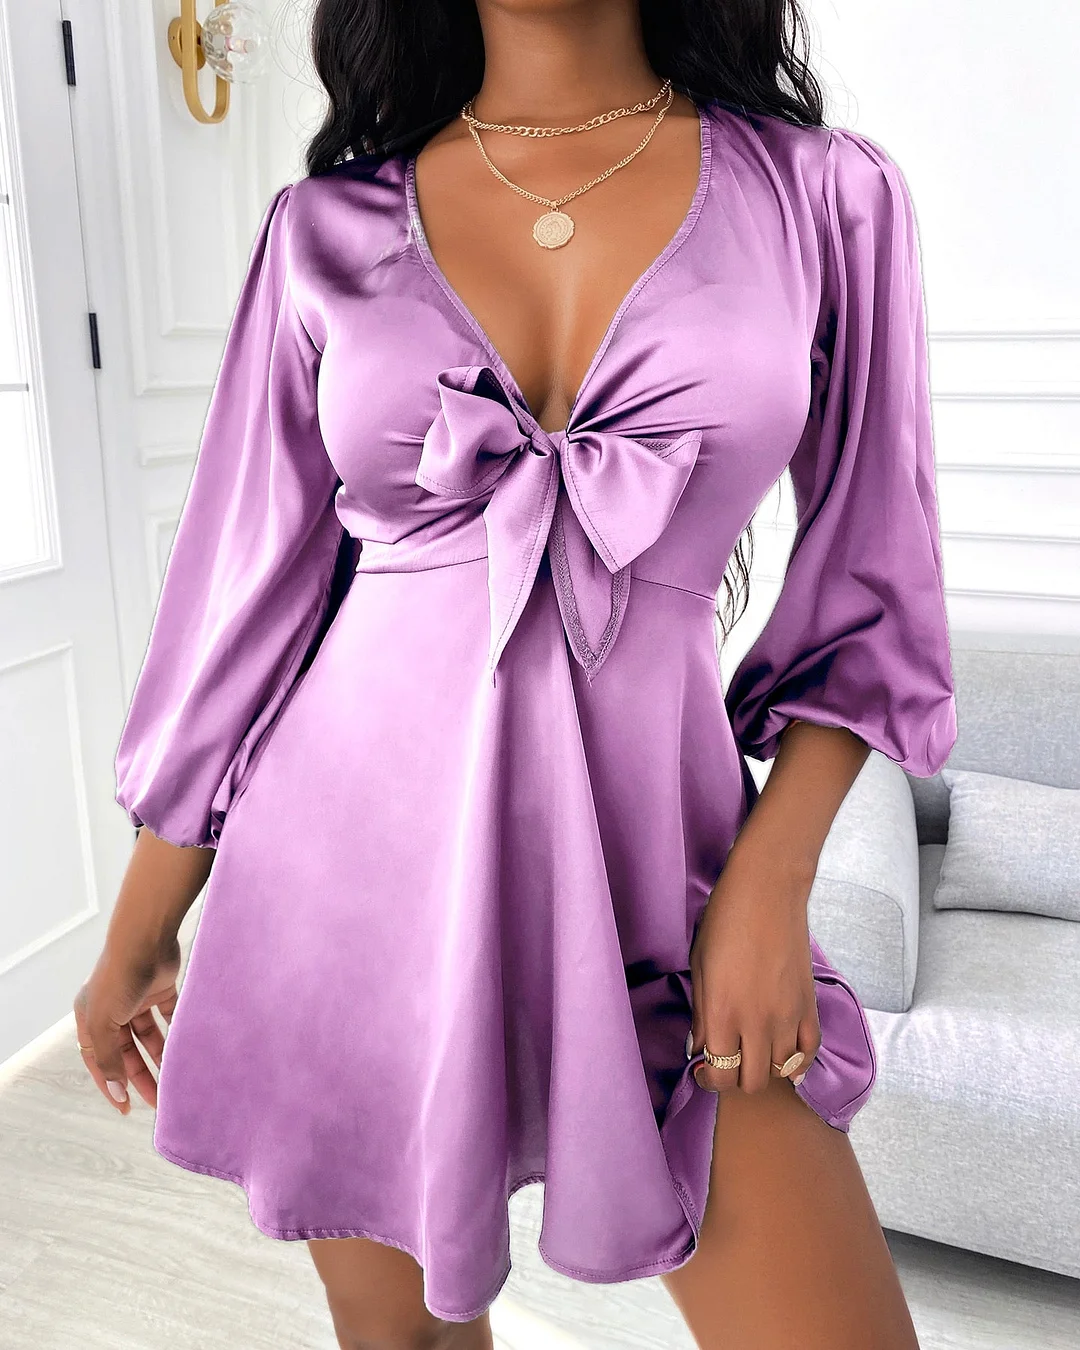 Billlnai  Graduation Party 2023 Women's Mini Satin Puff Sleeve Plunge Tie Front Dress Solid Bow Summer Spring Party Casual Chic Sexy V Neck Dress